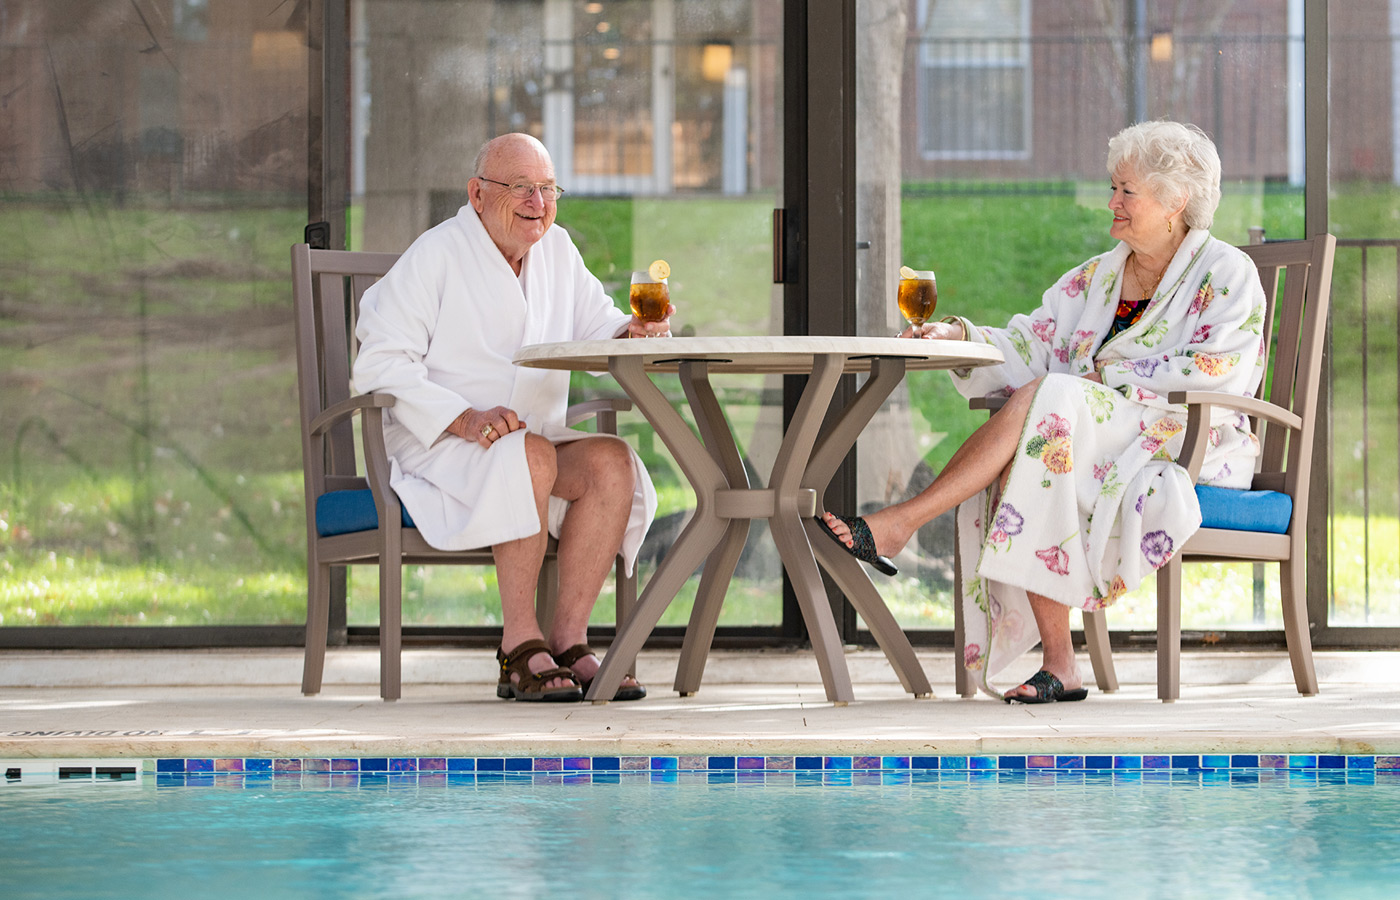 Two residents are sitting by a pool.